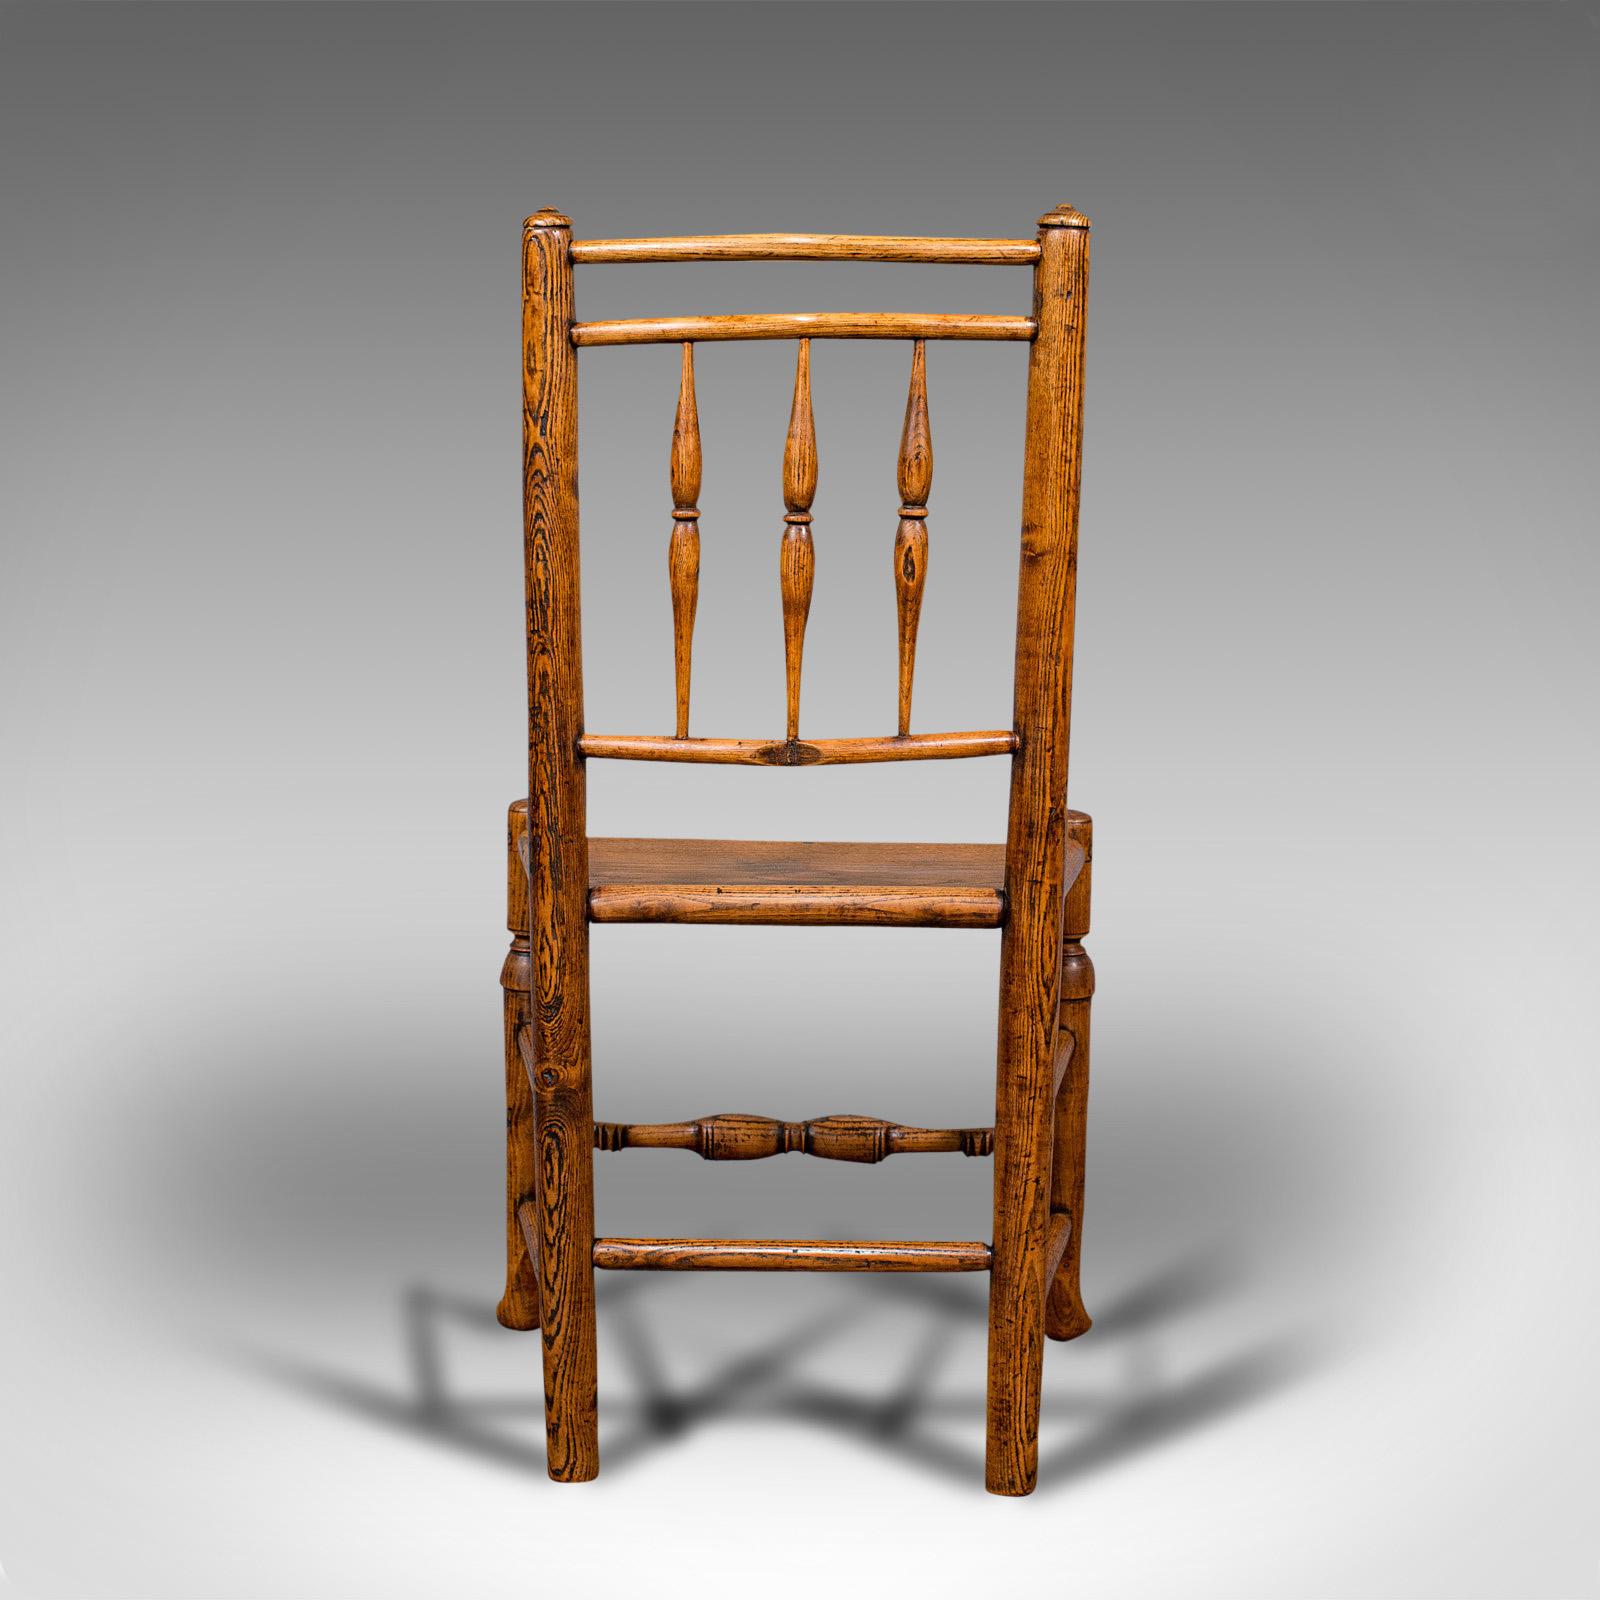 19th Century Small Antique Tanner's Chair, English, Ash, Elm, Spindle Back, Seat, Victorian